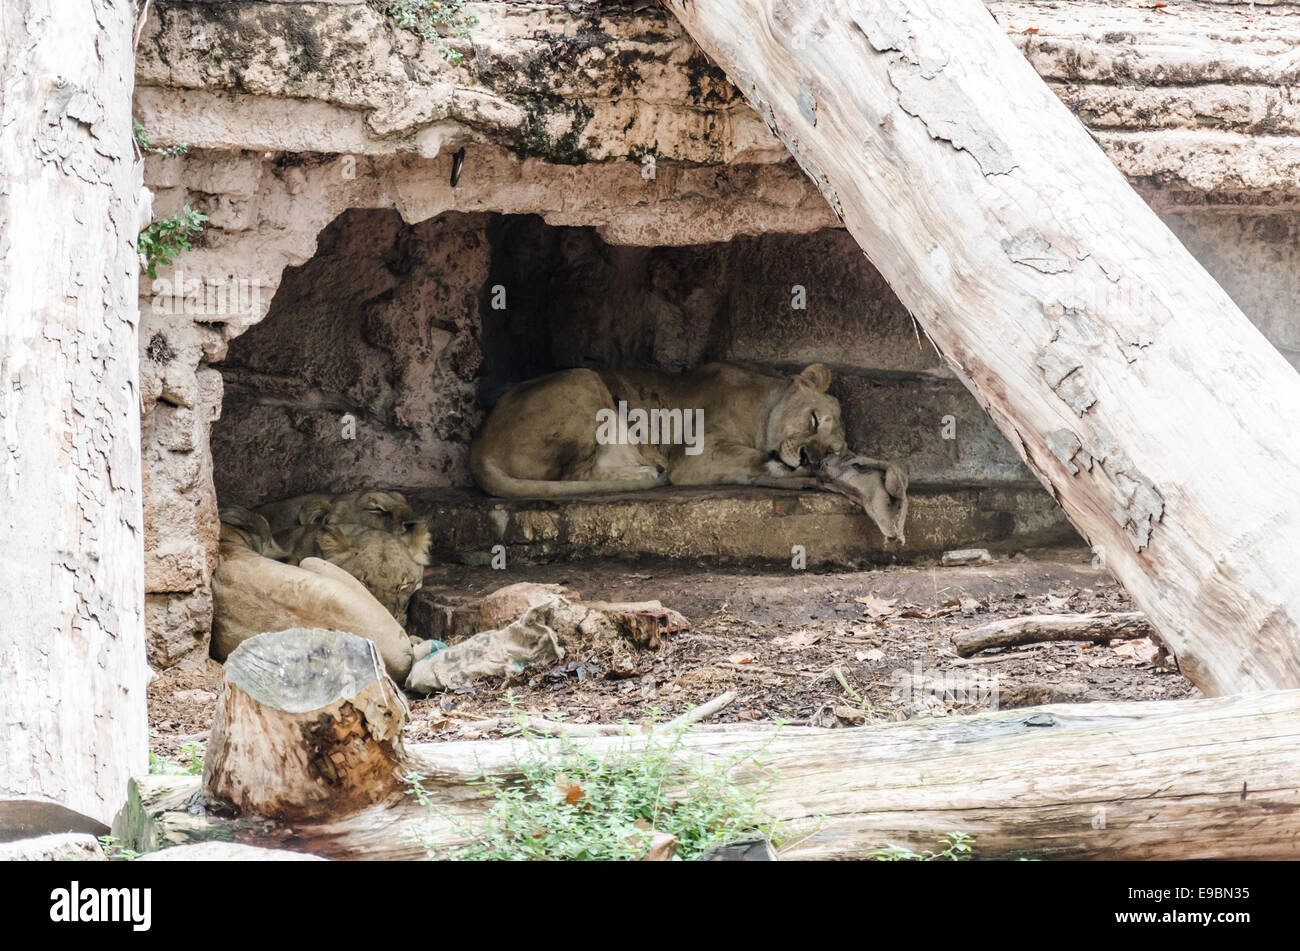 Lions sleeping under shelter in Barcelona zoo Stock Photo